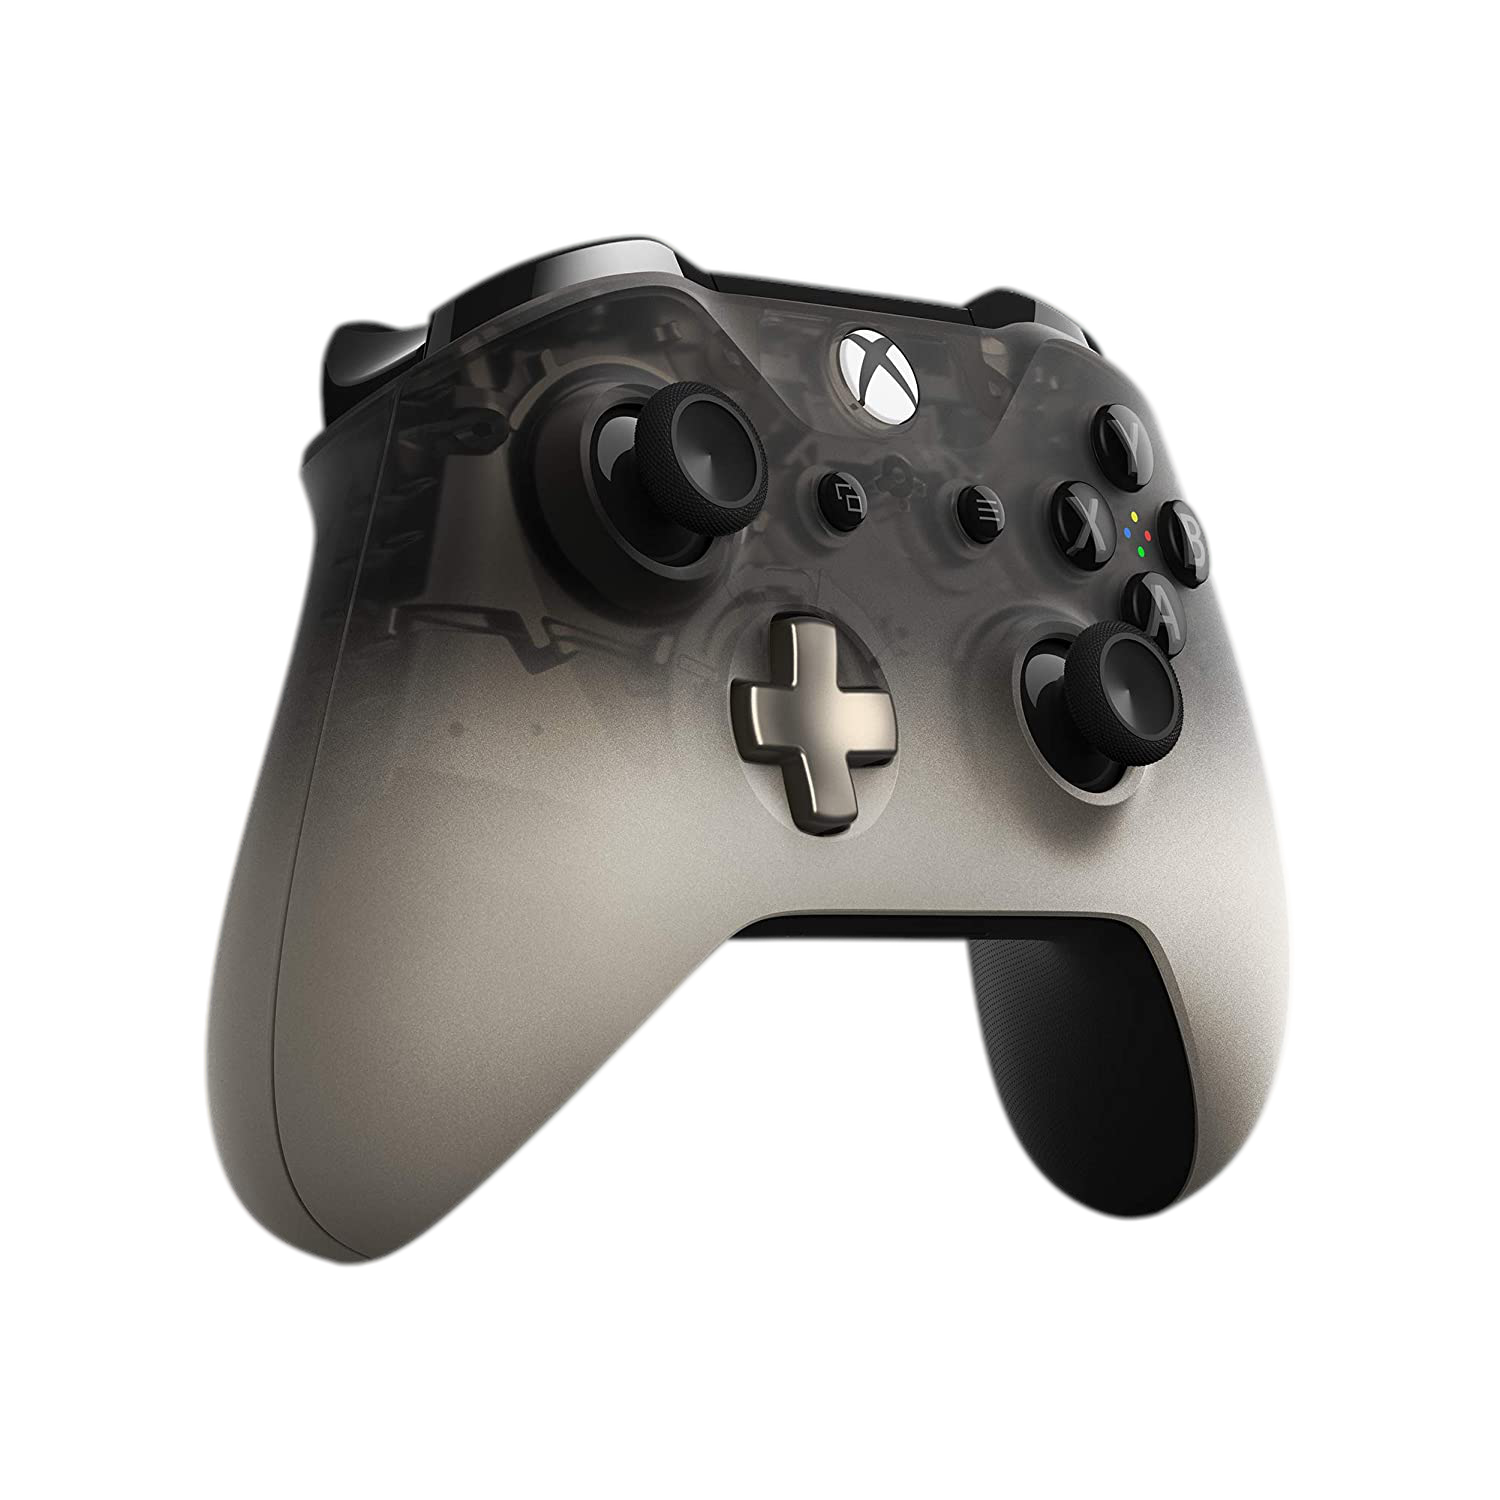 Microsoft-Official-Xbox-Controller-Phantom-Black-Special-Edition-12-Months-Warranty